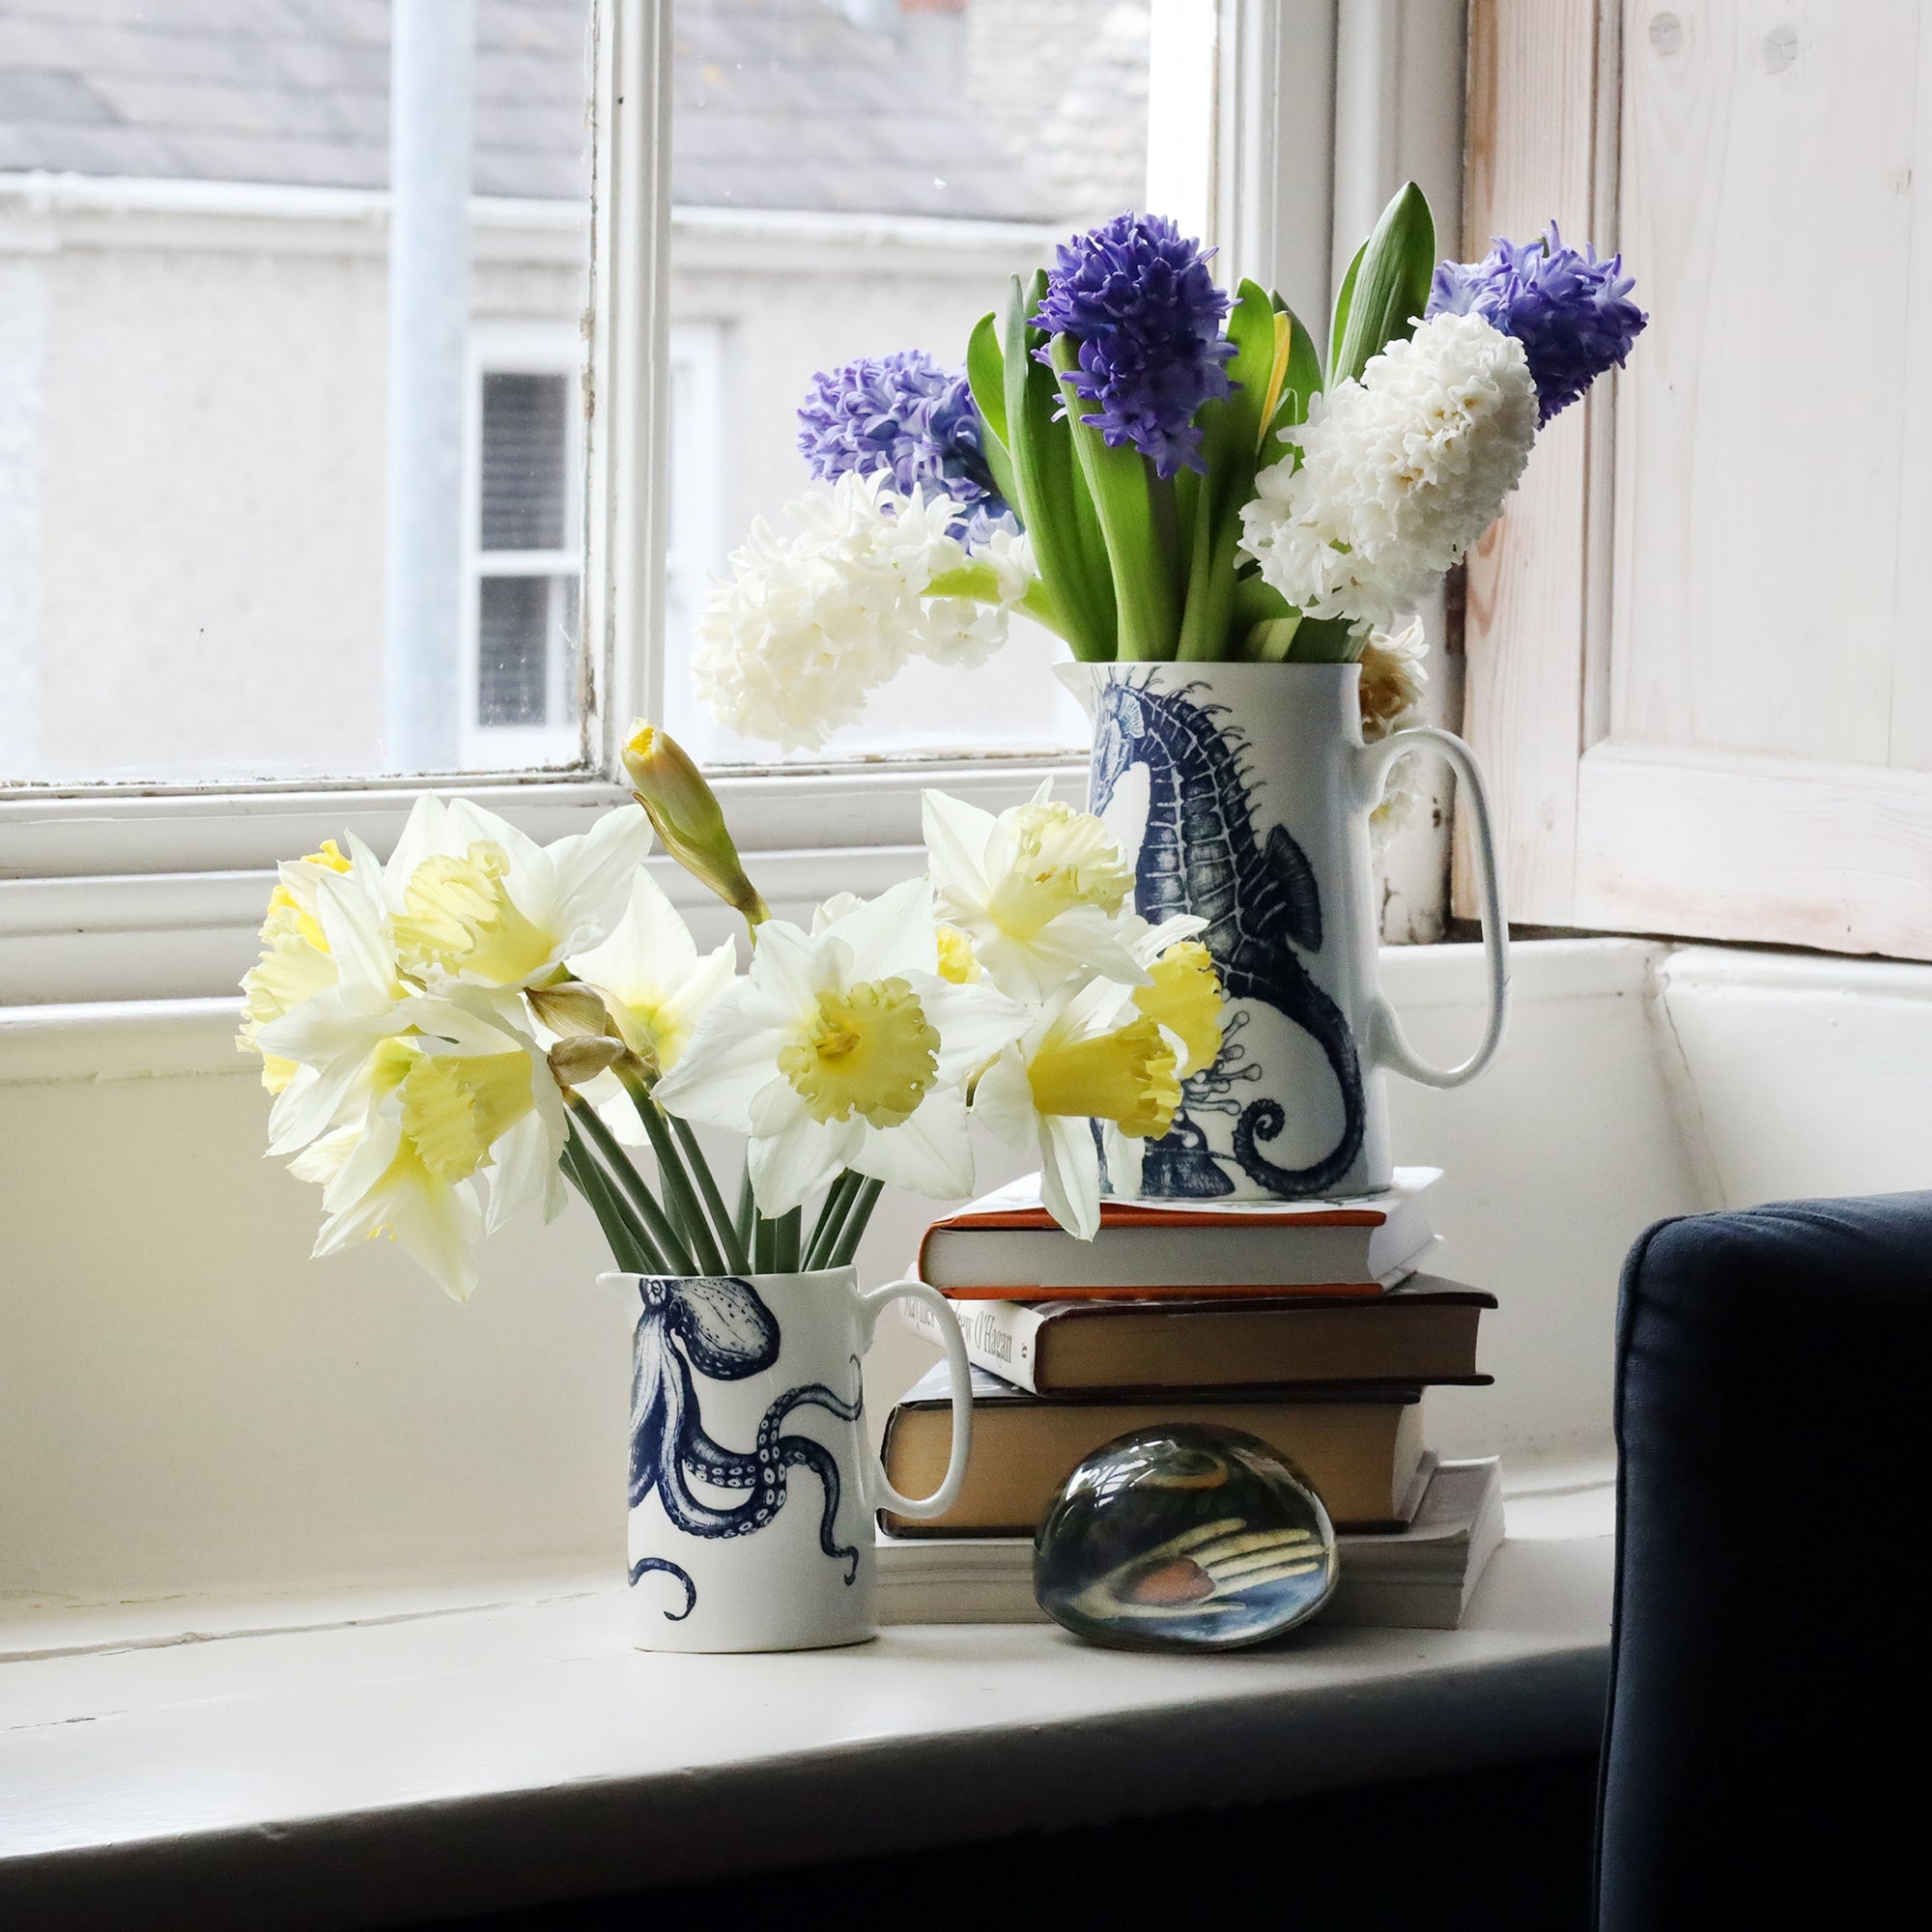 A painted wooden window seat with a pile of books and 2 jugs filled with spring flowers. One jug has an illustration of a seahorse and the other an octopus, both of which are in navy blue.